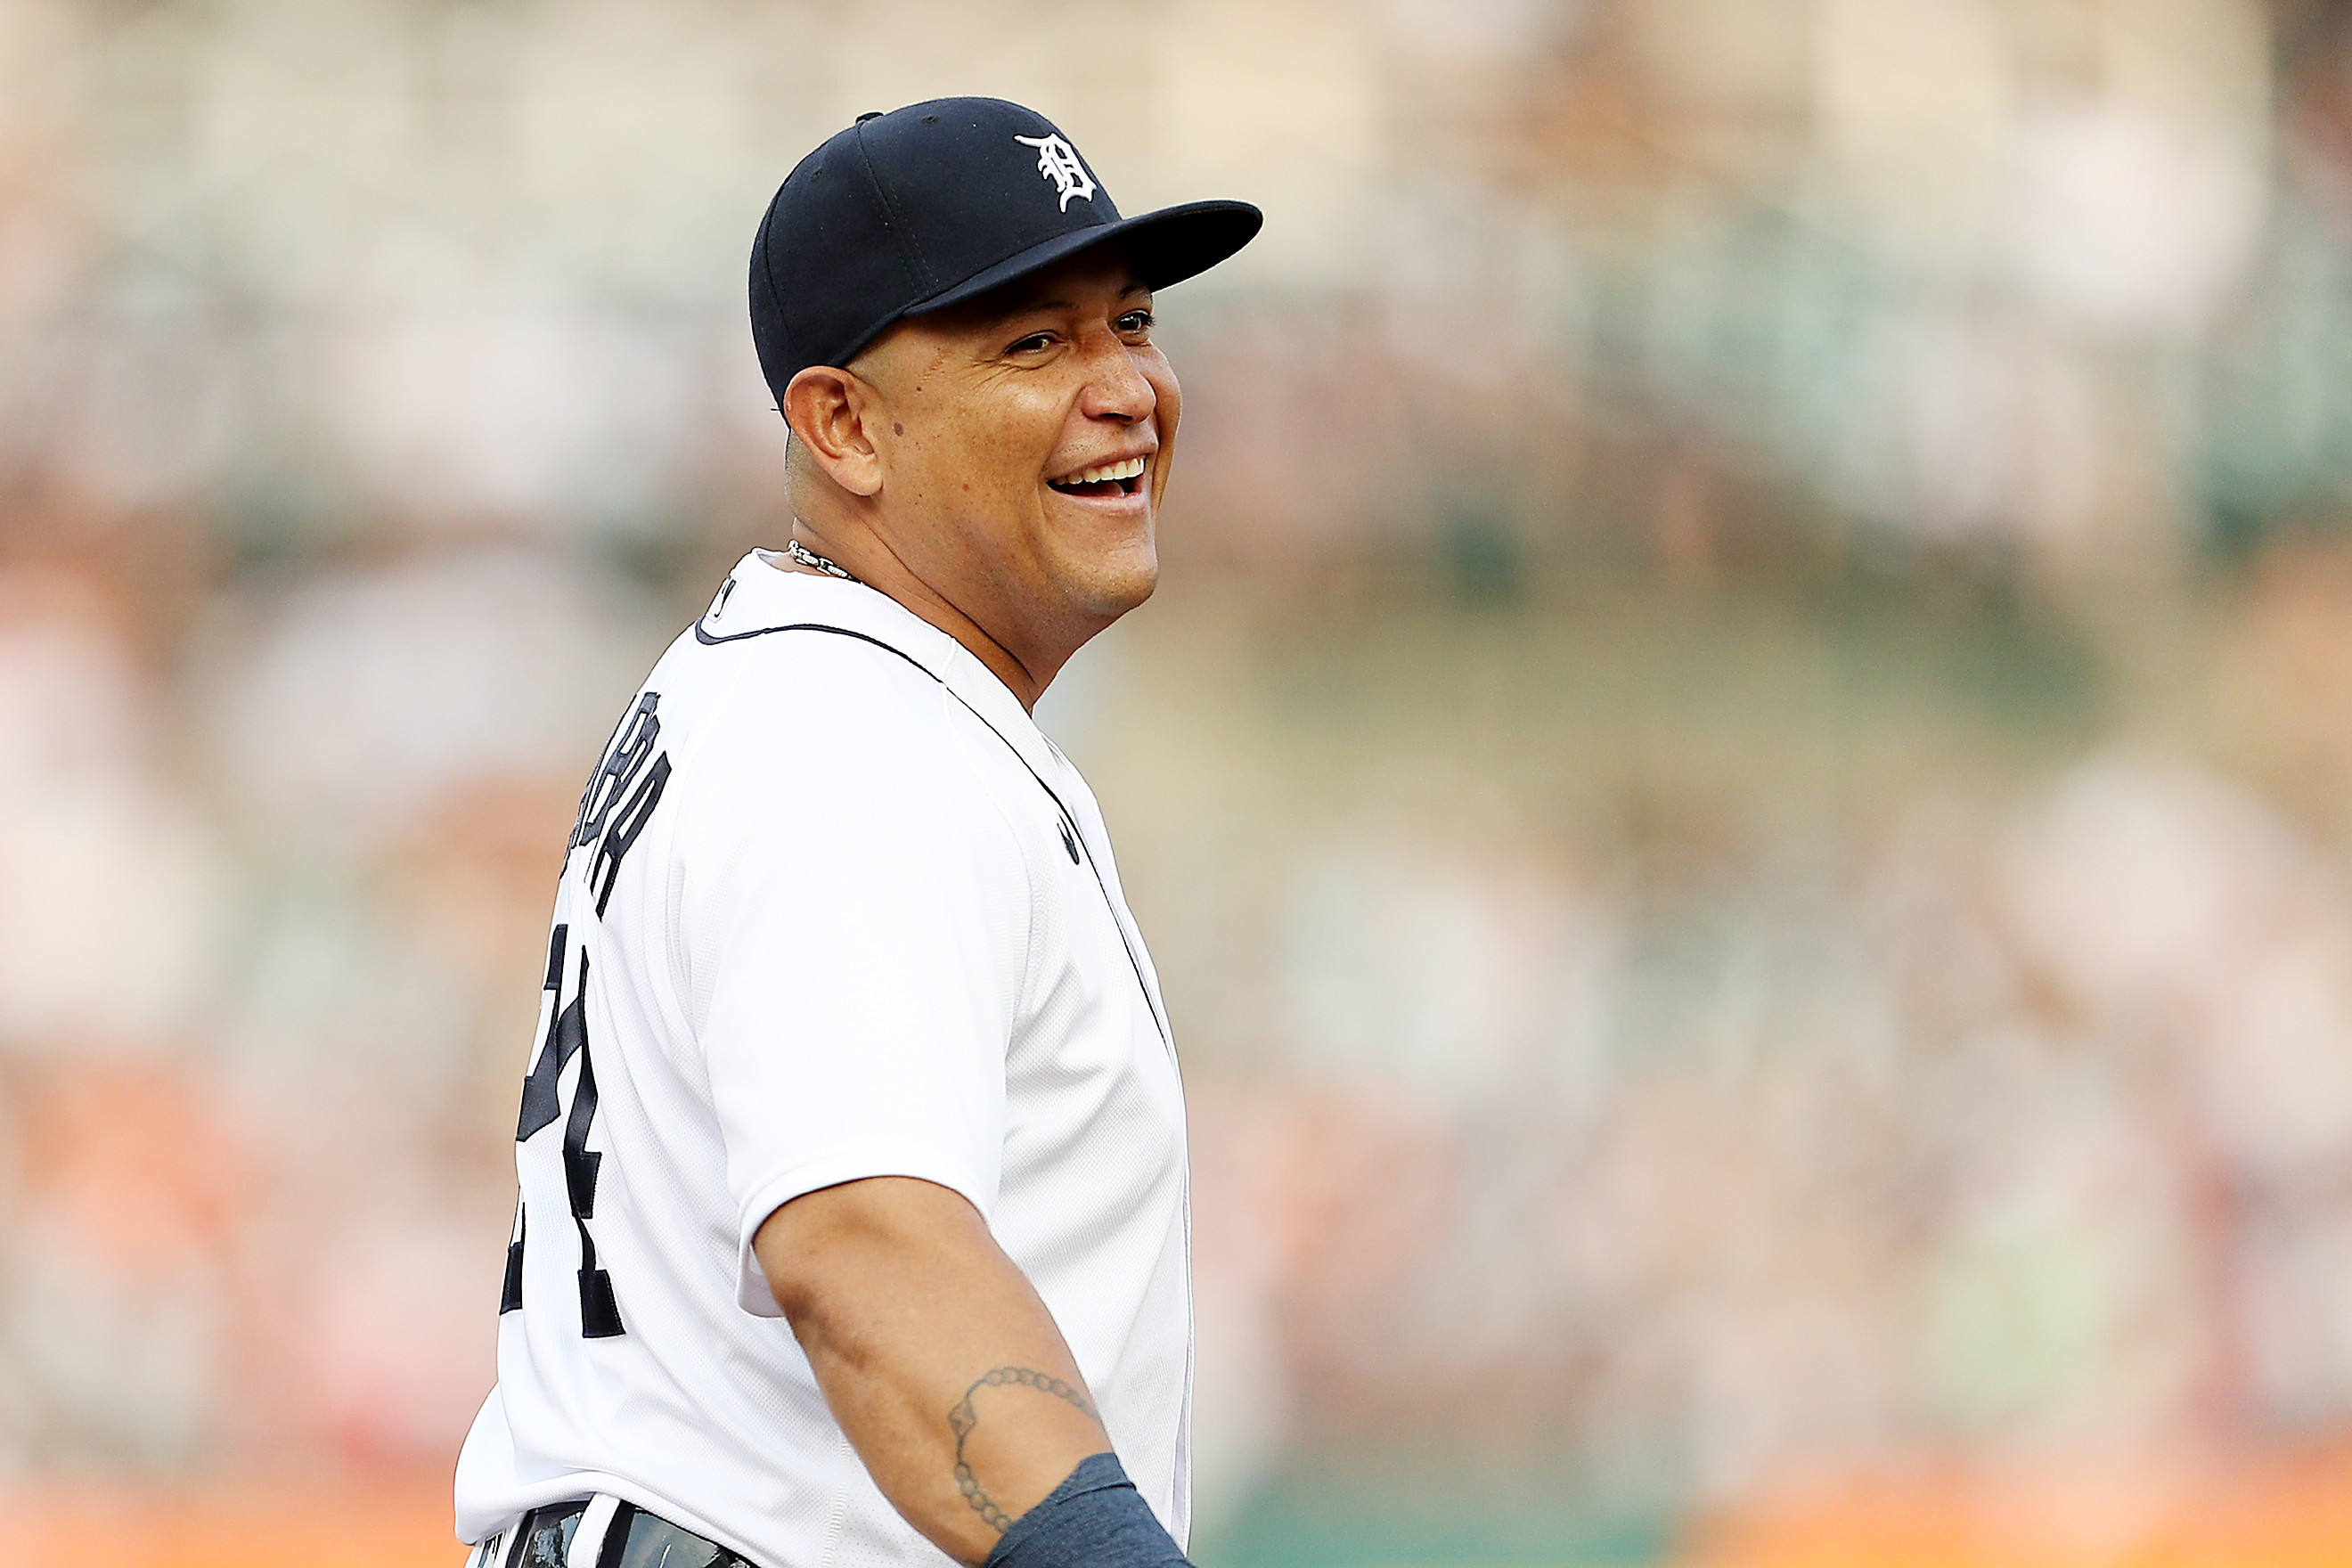 MLB on X: One last party at Miggy's house. @MiguelCabrera's final  homestand at Comerica Park begins tonight.  / X